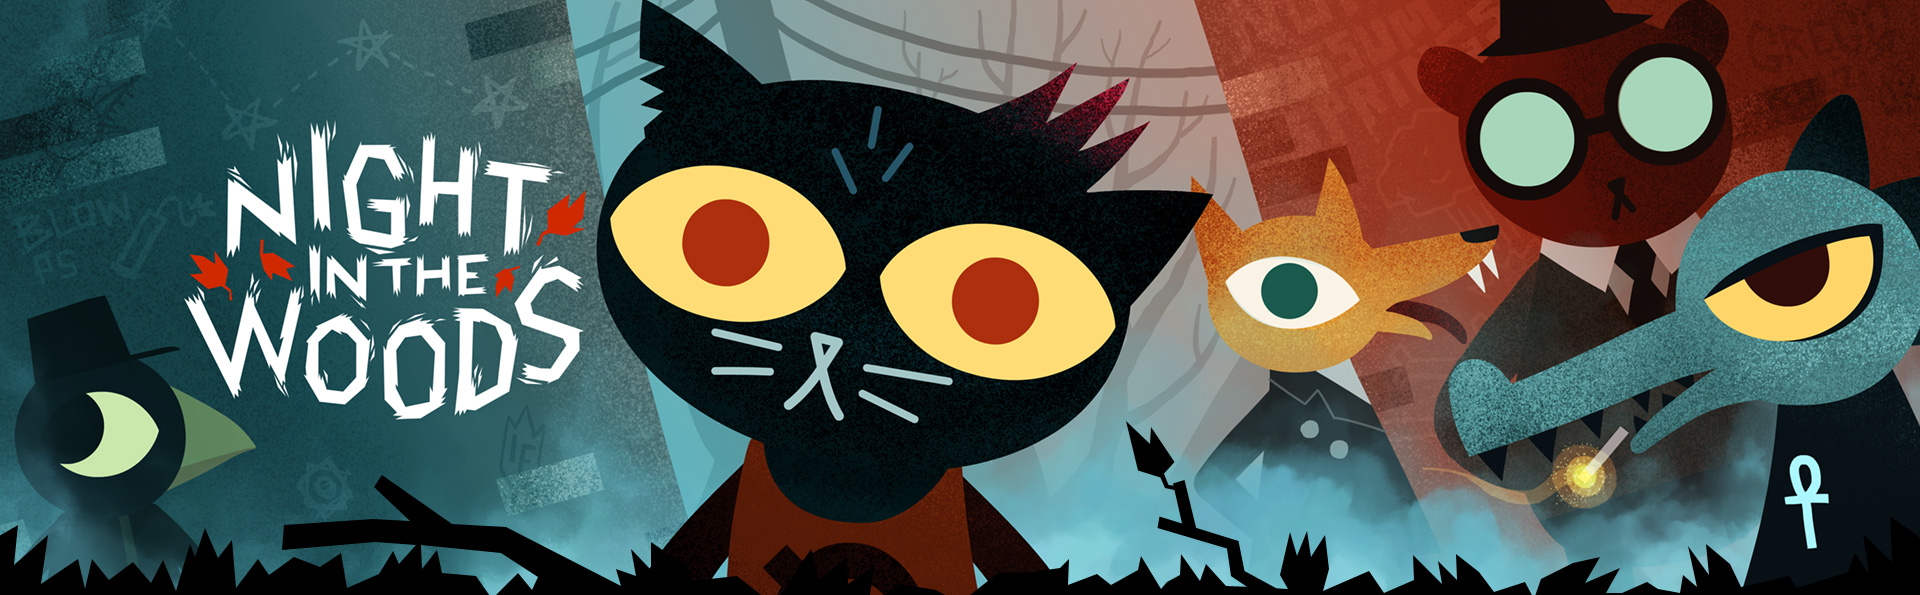 Night In The Woods banner